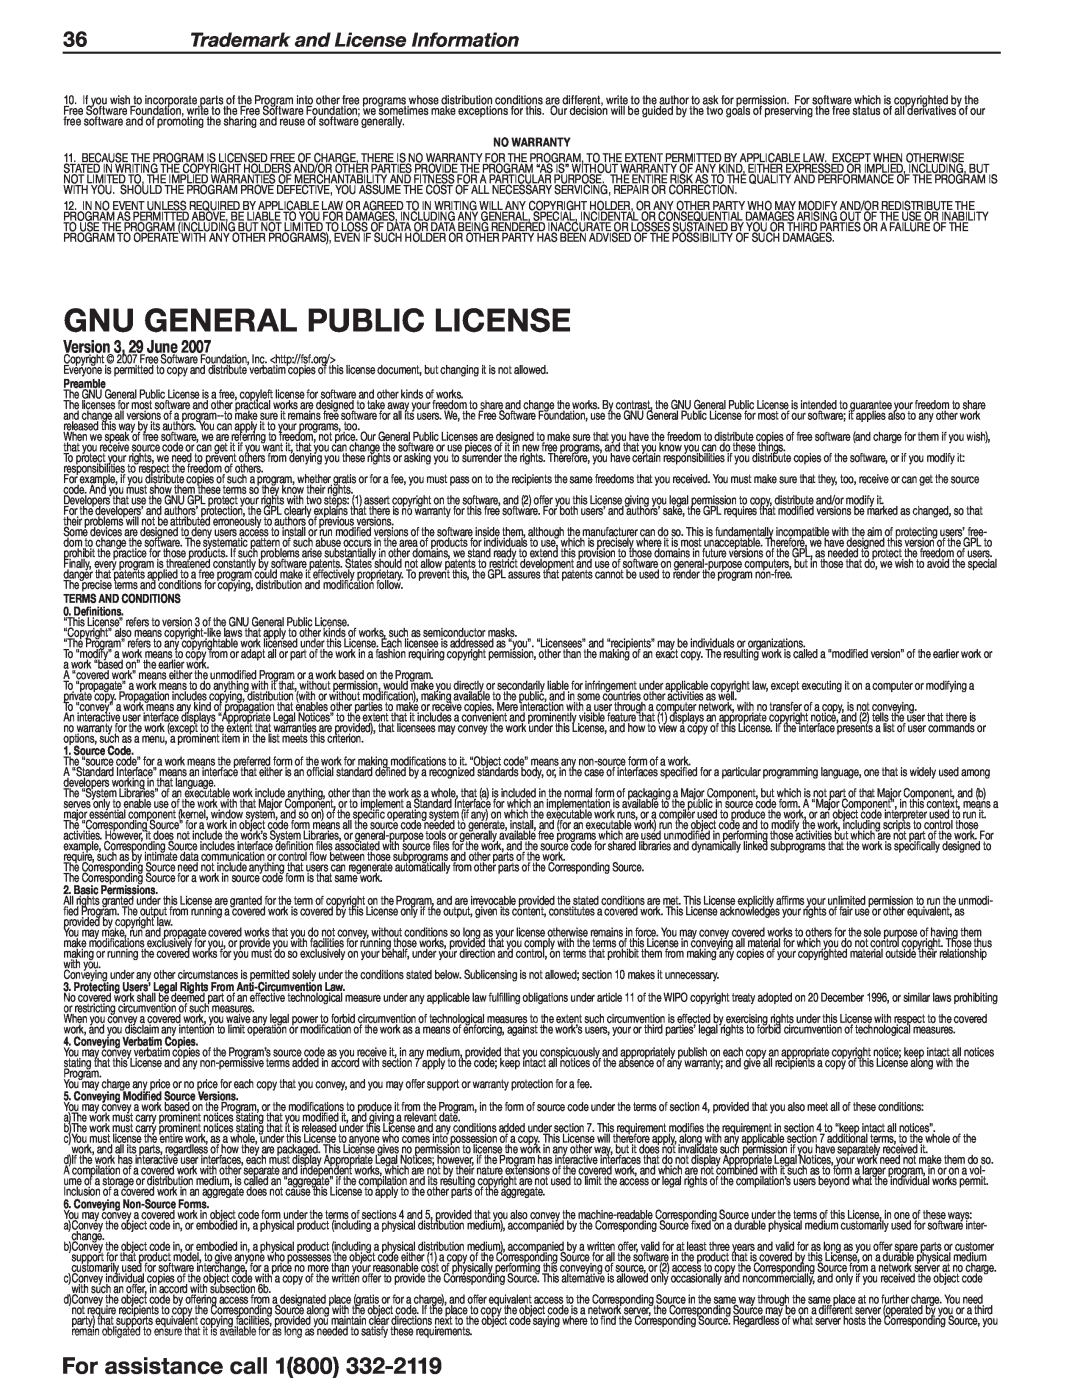 Mitsubishi Electronics 838 manual Gnu General Public License, 36Trademark and License Information, For assistance call 